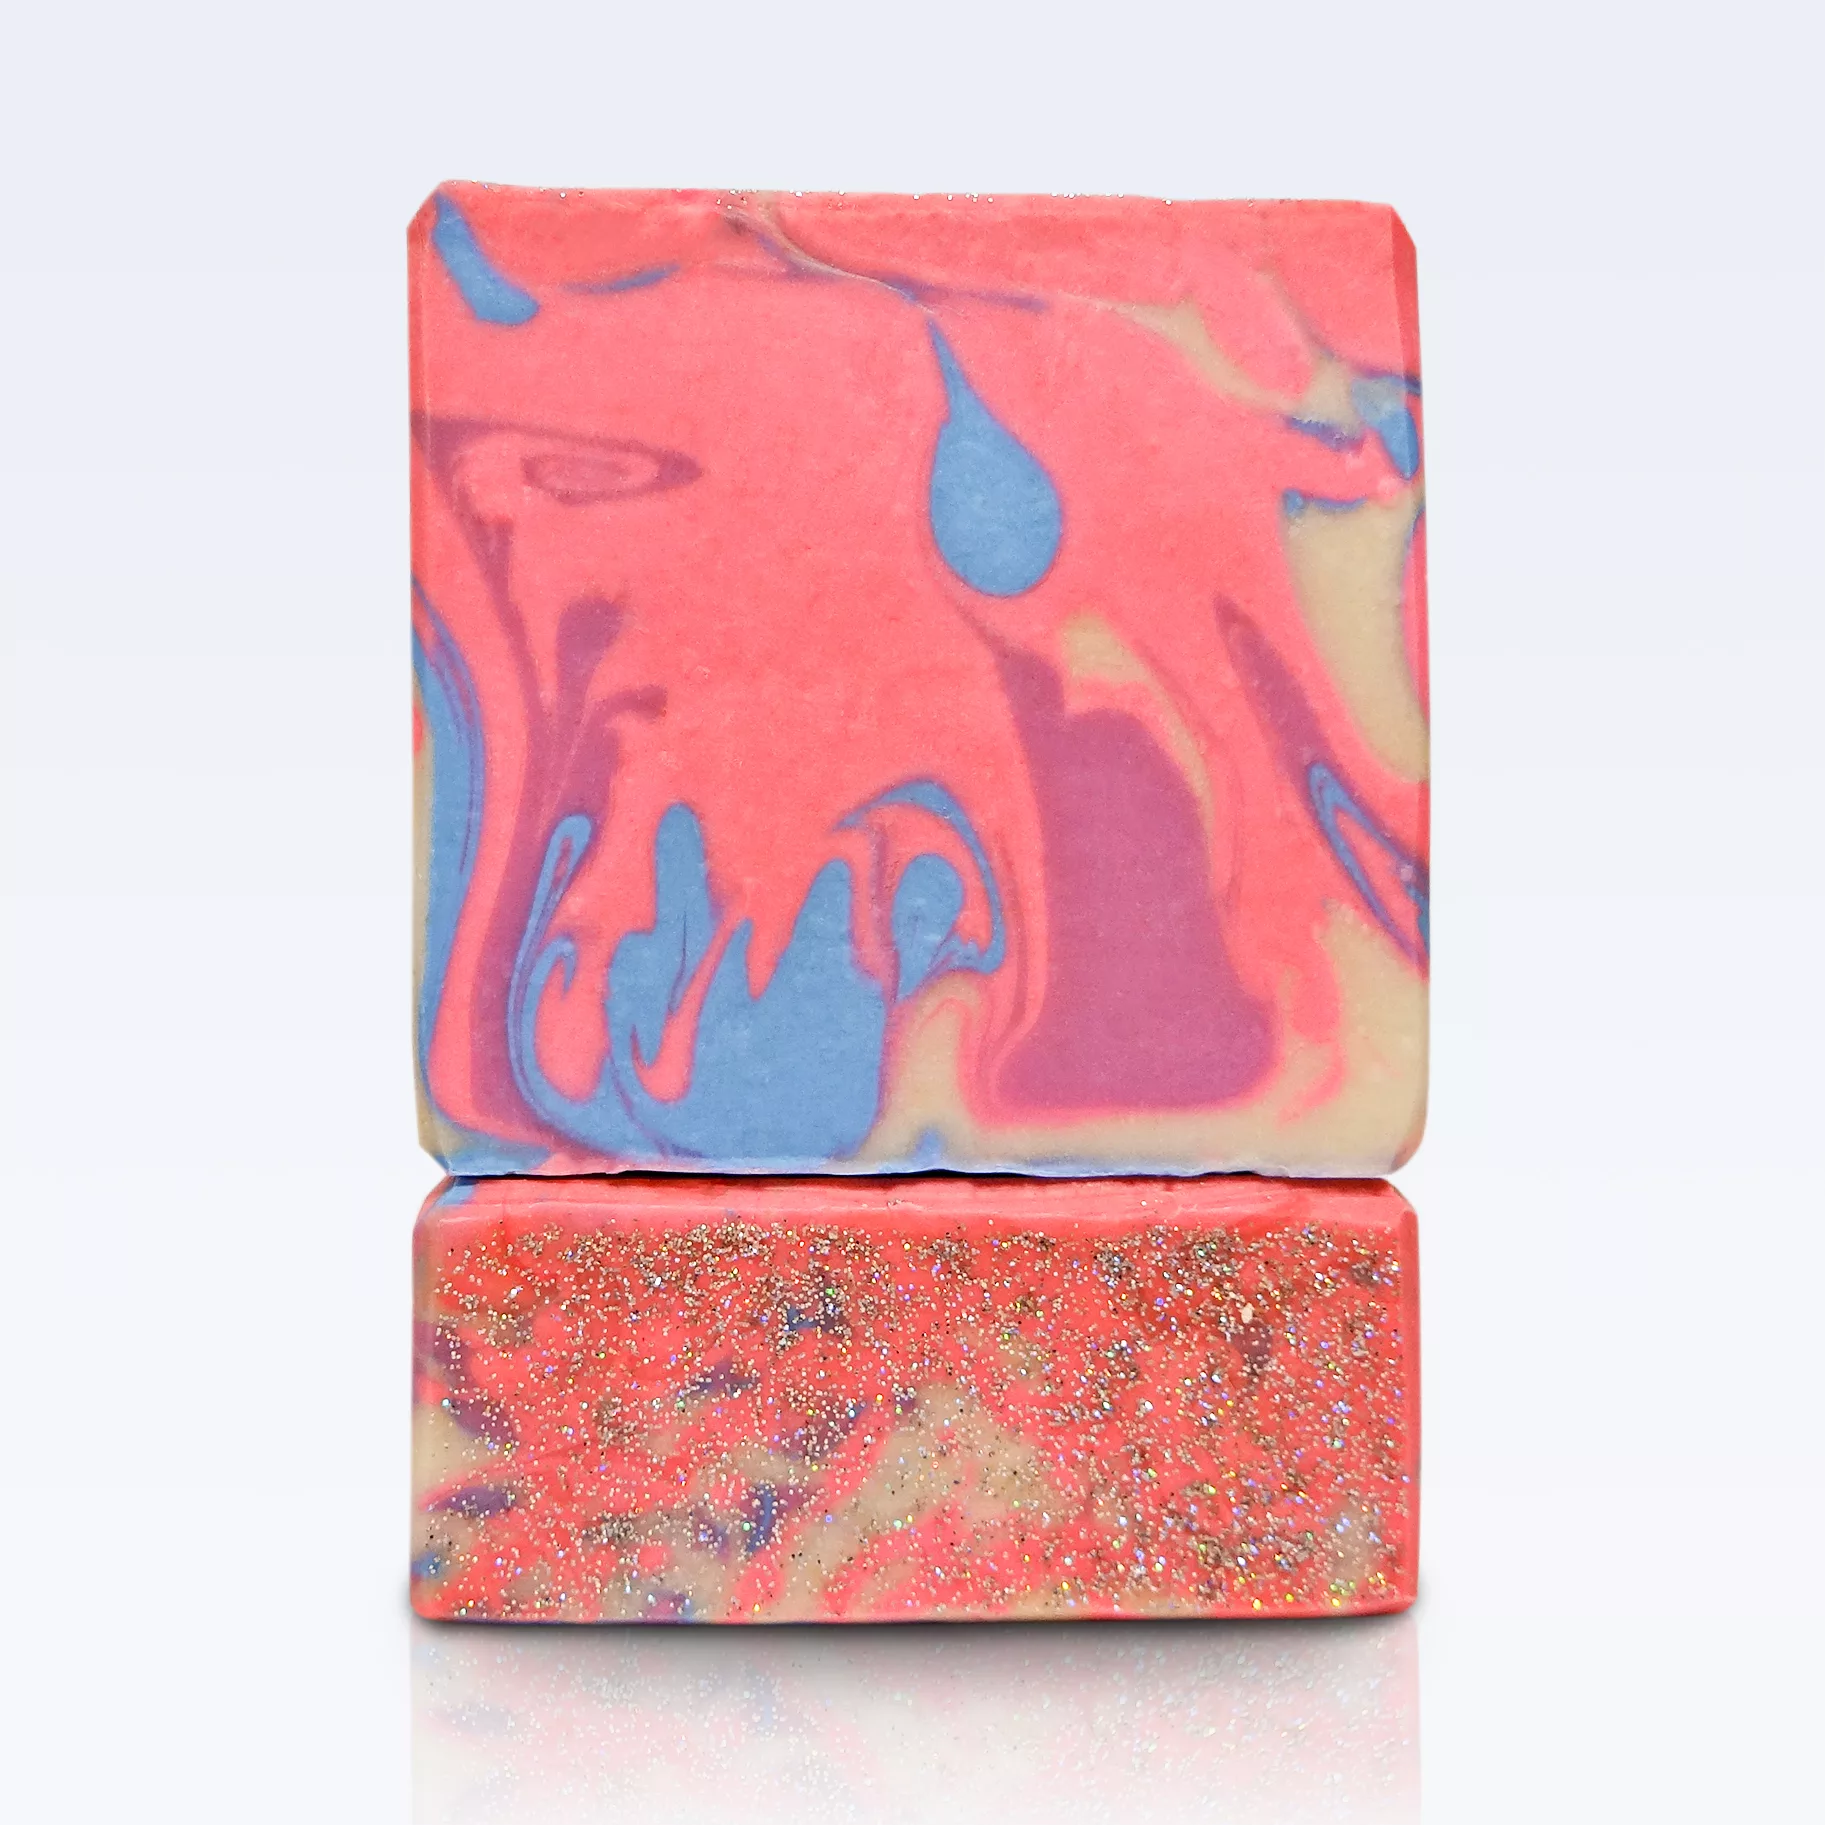 Unicorn Poop handmade kids soap by Tubby Tabby Soaps (bubblegum fragrance, swirled soap with glitter on top)